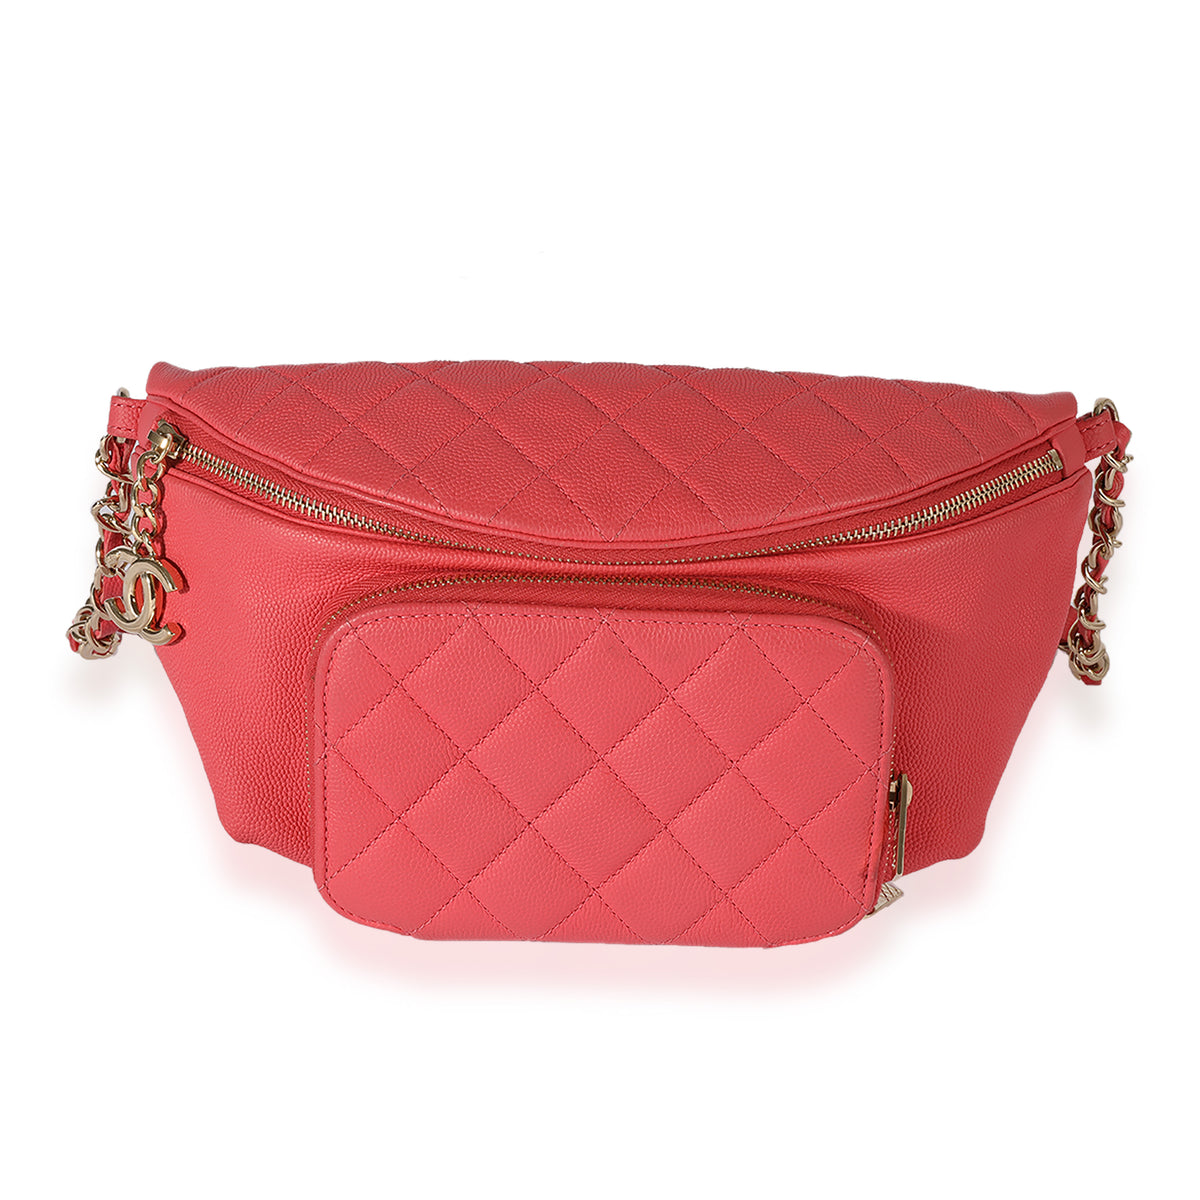 Chanel Light Pink Quilted Caviar Small Business Affinity Flap Bag